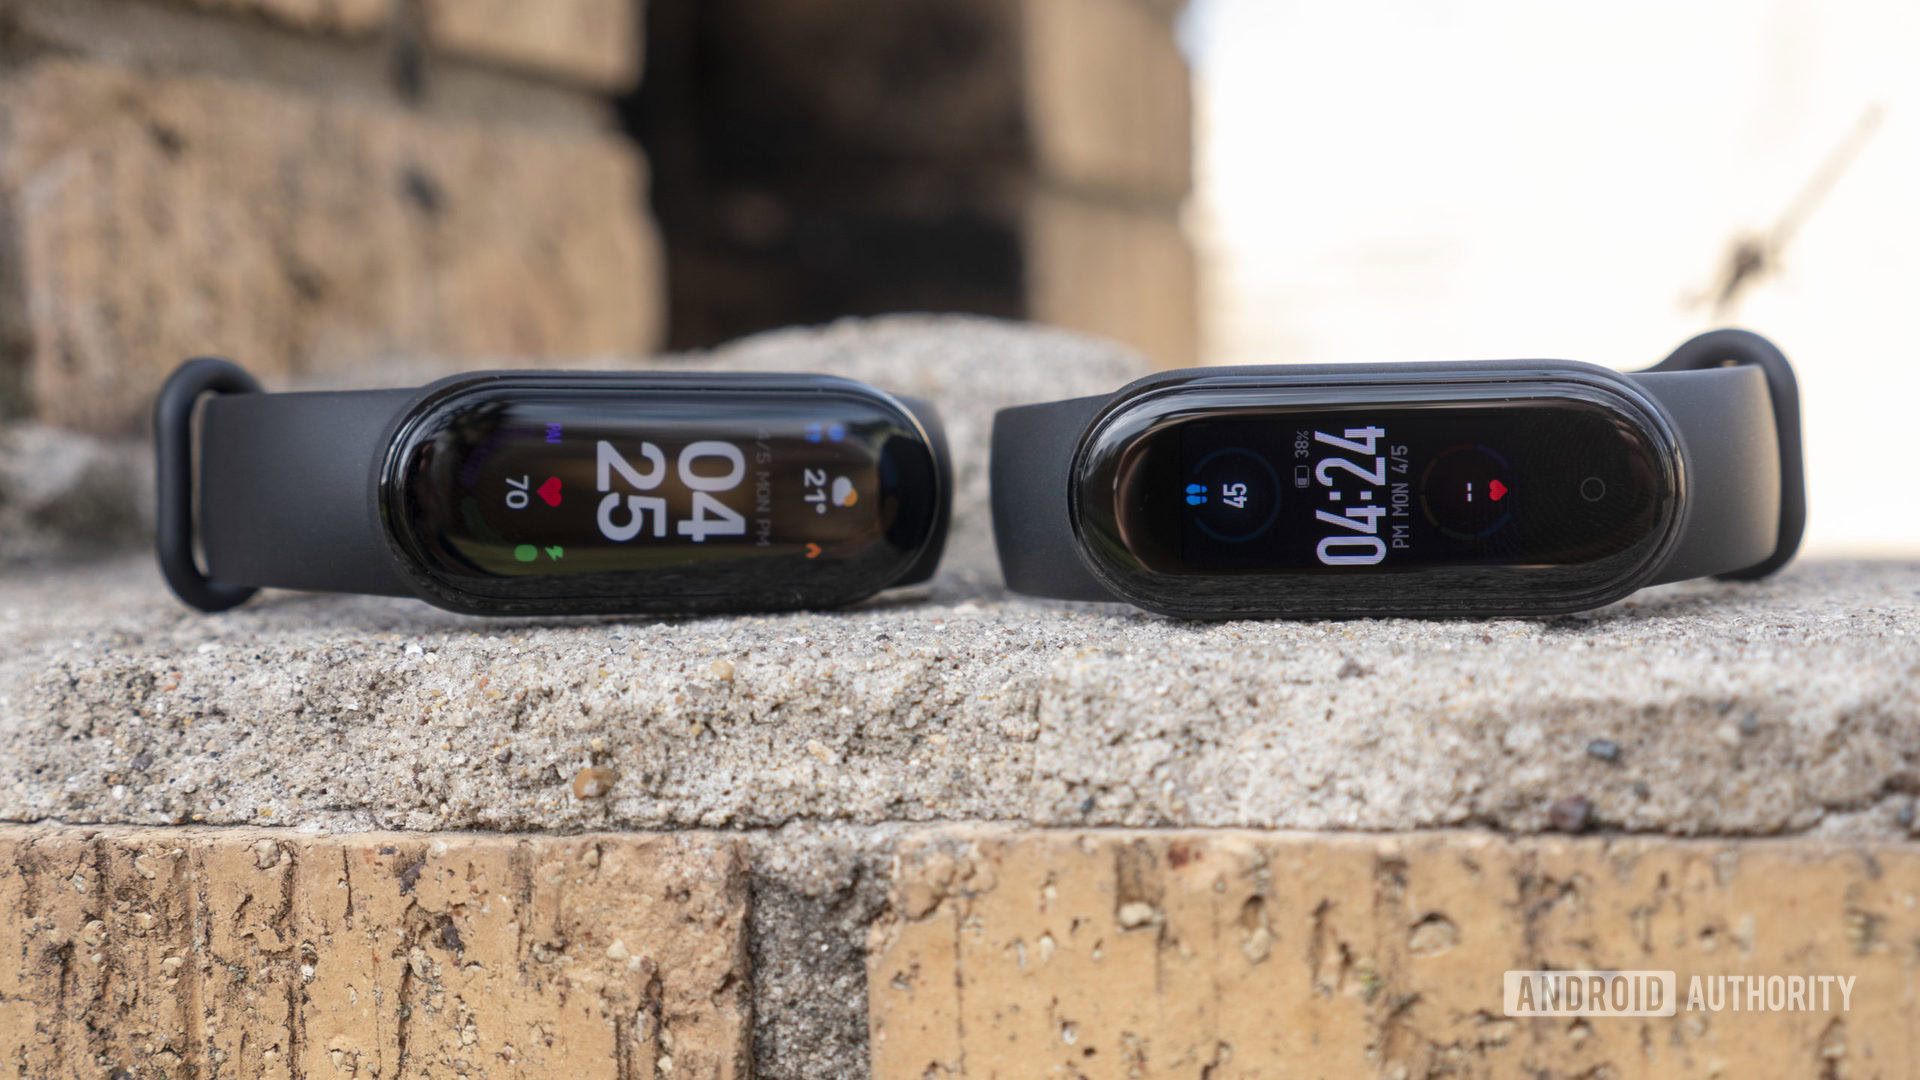 Xiaomi Mi Band 4 vs Honor Band 5: which is the best fitness